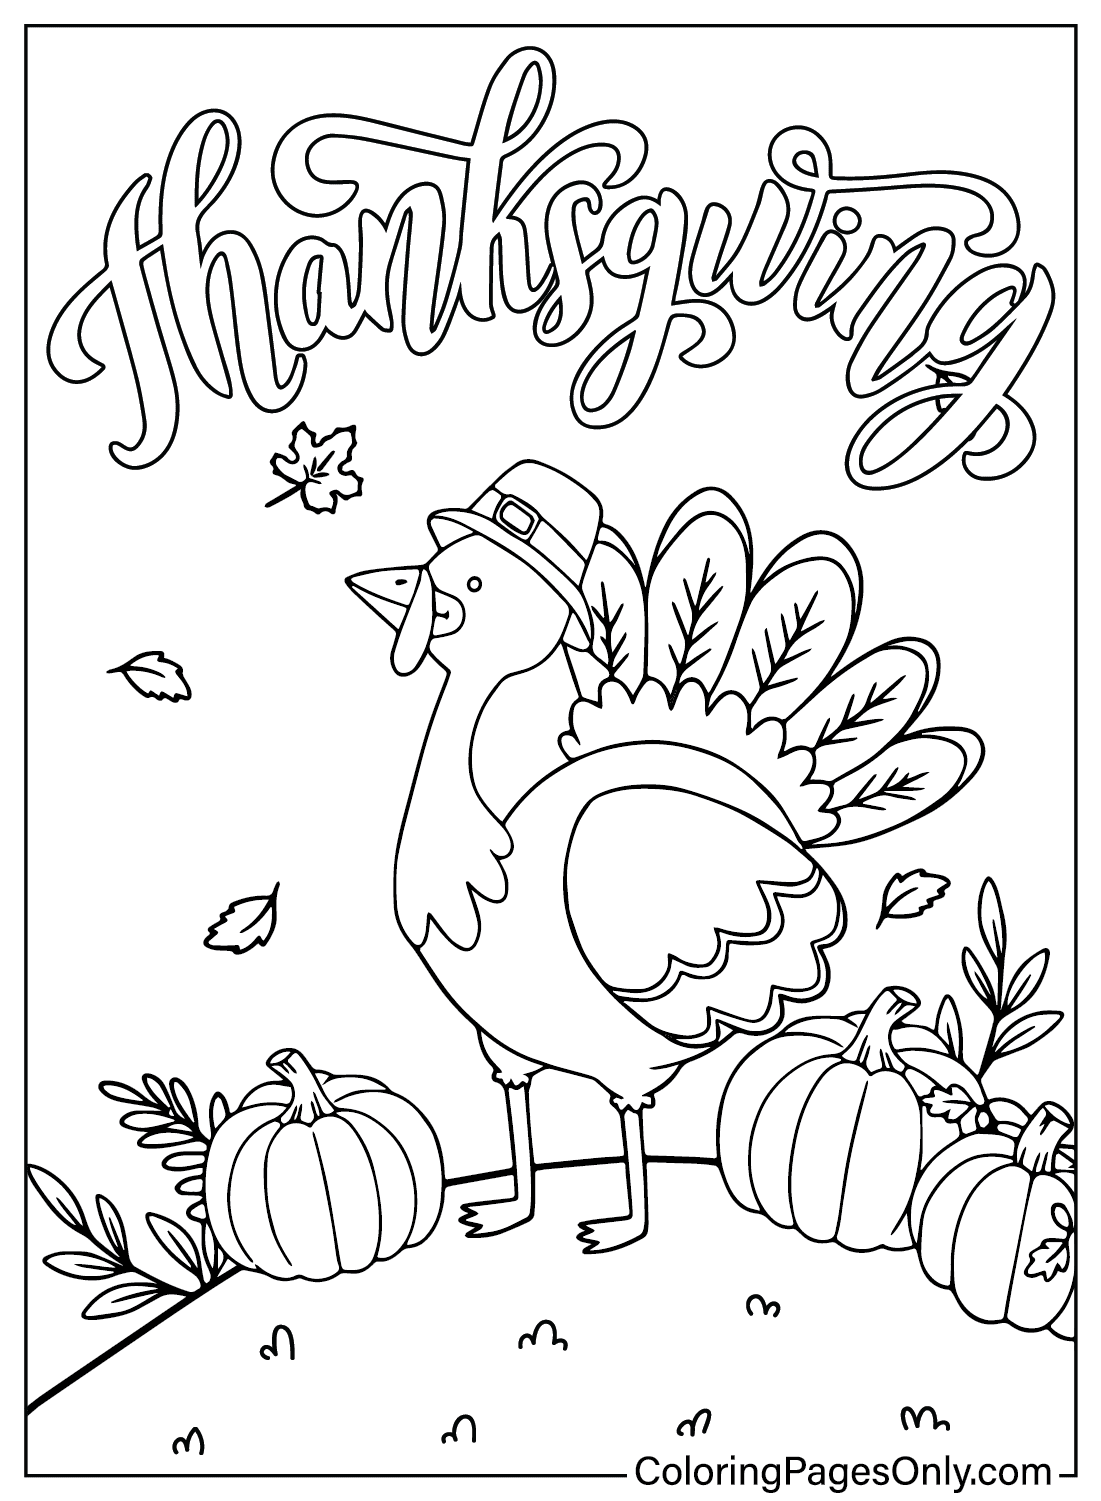 Thanksgiving Cartoon Coloring Page Free - Free Printable Coloring Pages